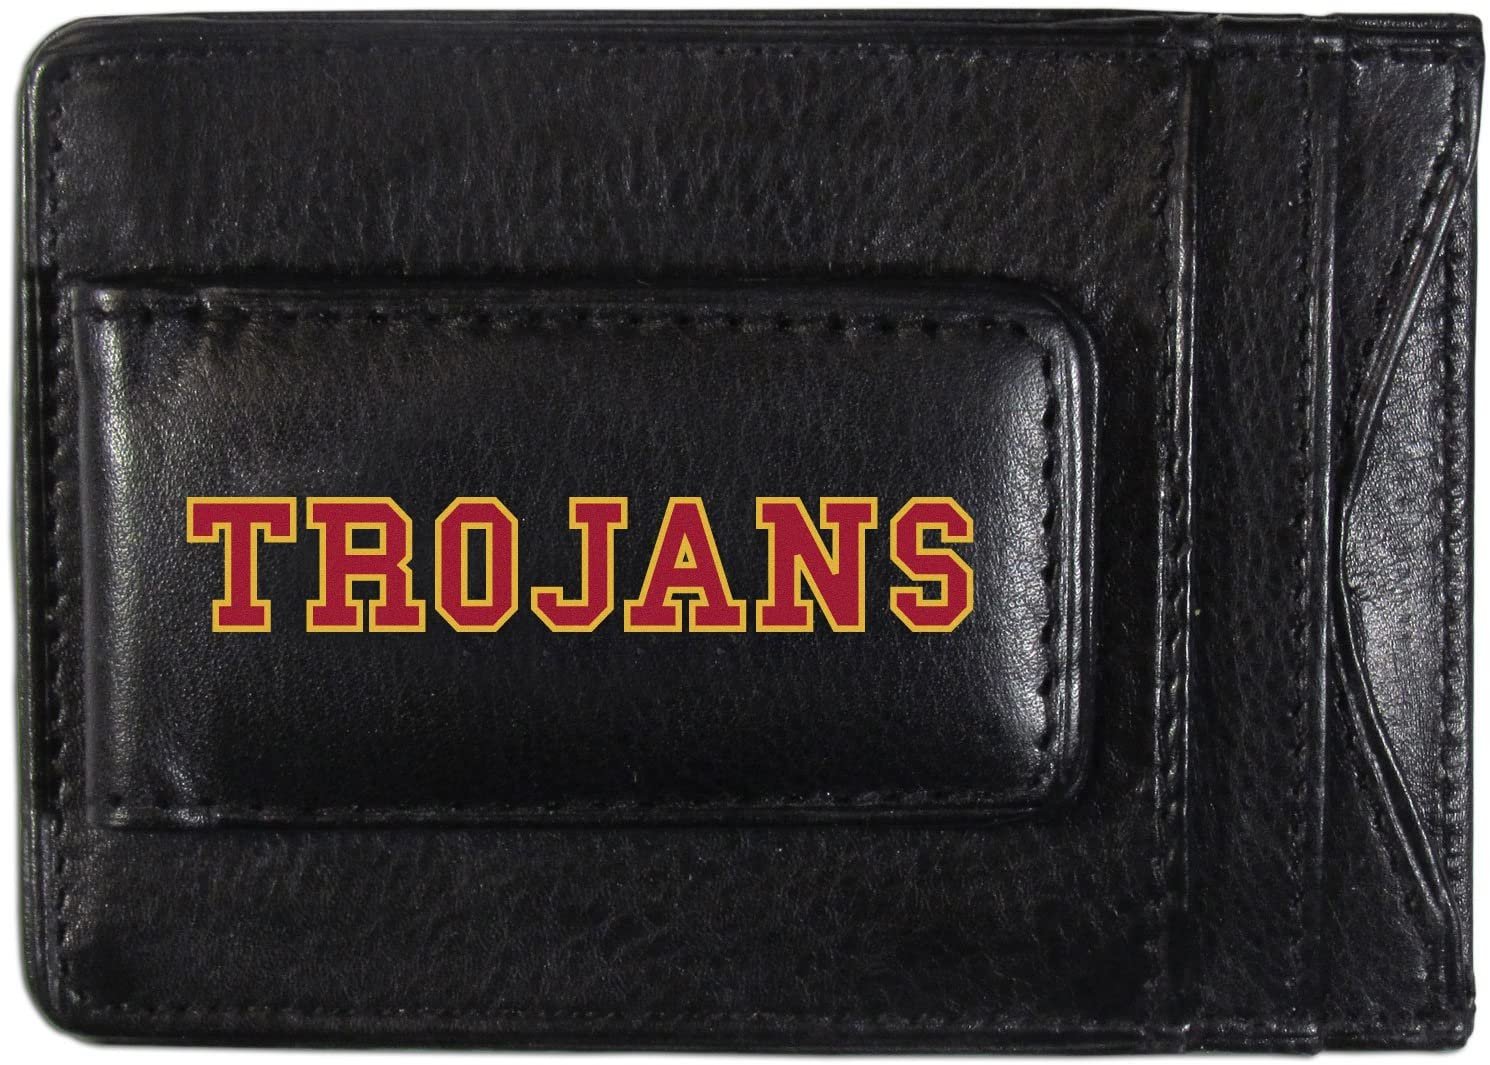 University of Southern California USC Trojans Black Leather Wallet, Front Pocket Magnetic Money Clip, Printed Logo